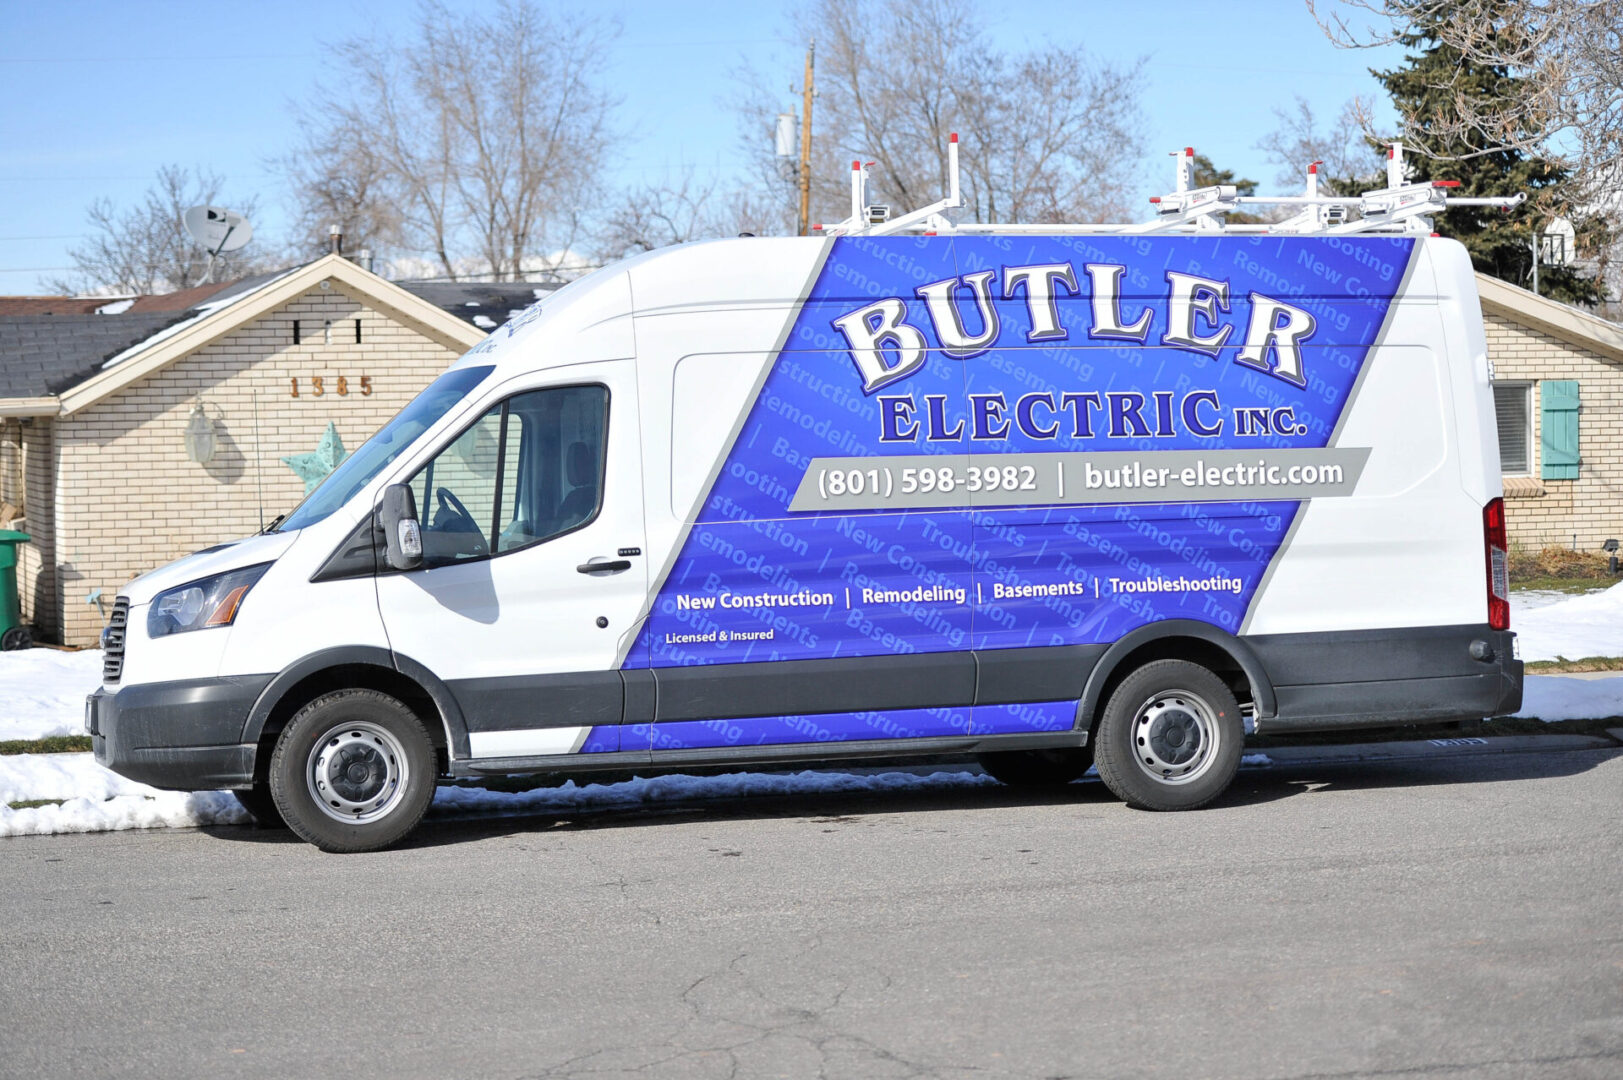 A white van with blue and black lettering on the side.